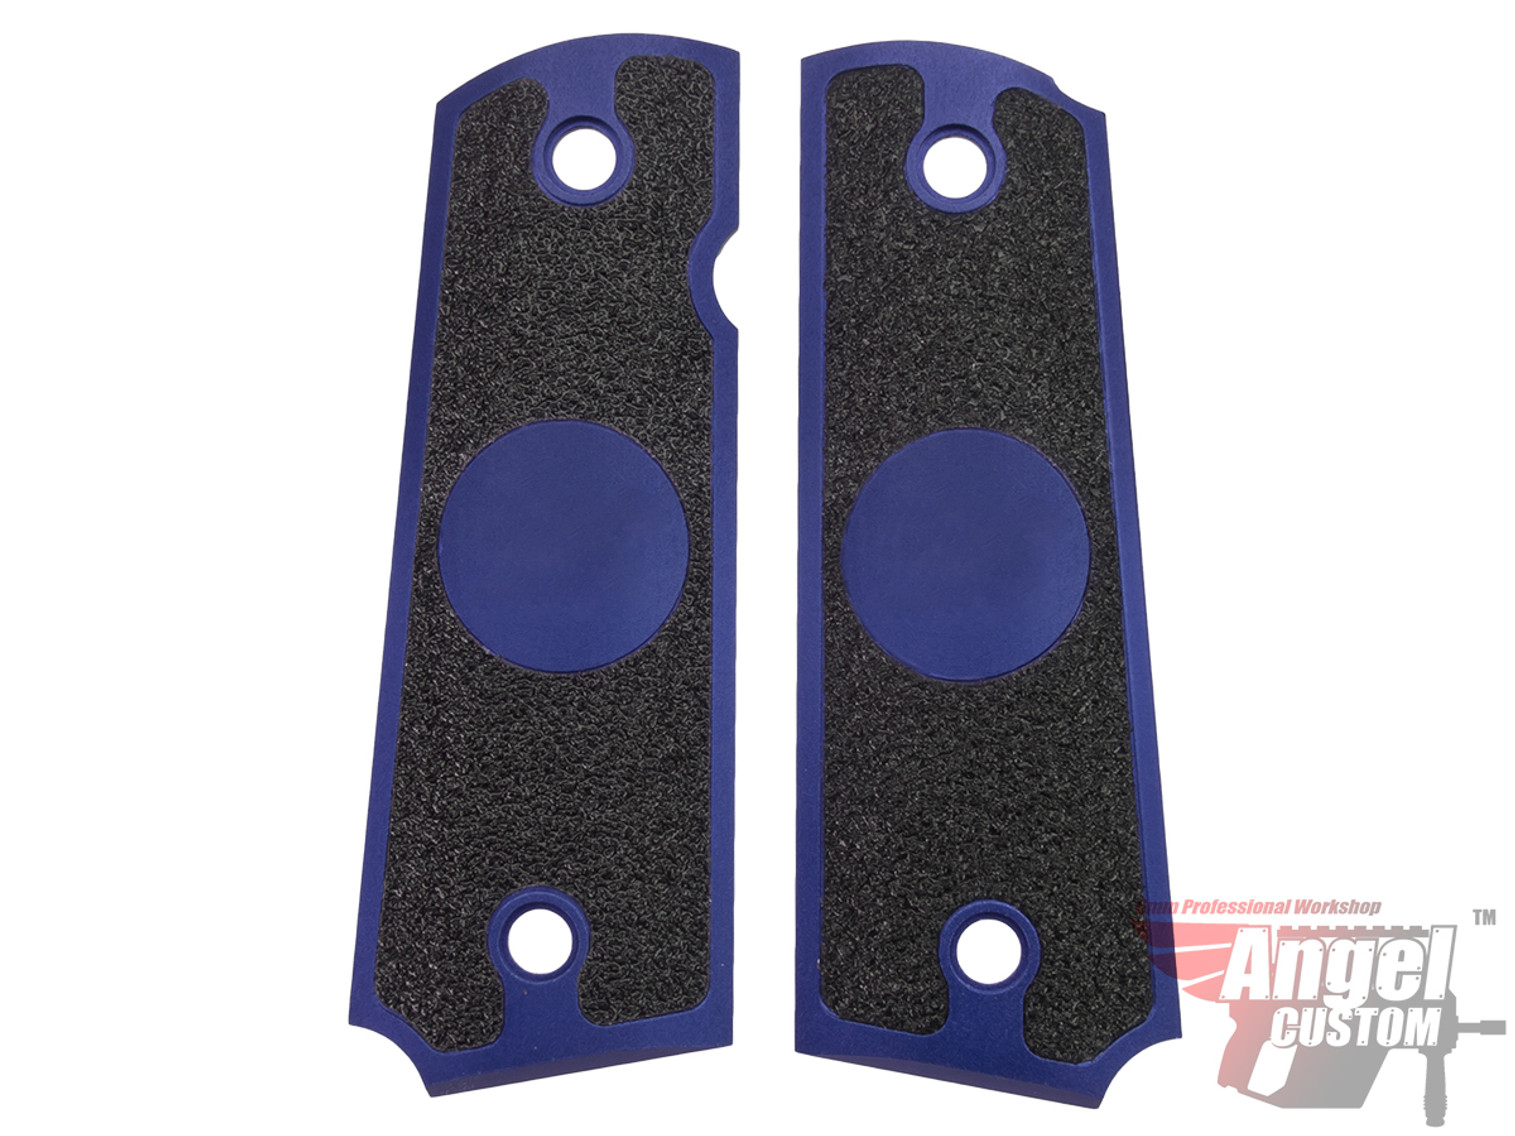 Angel Custom CNC Machined Tac-Glove Grips for Tokyo Marui/KWA/Western Arms 1911 Series Airsoft Pistols - Navy Blue